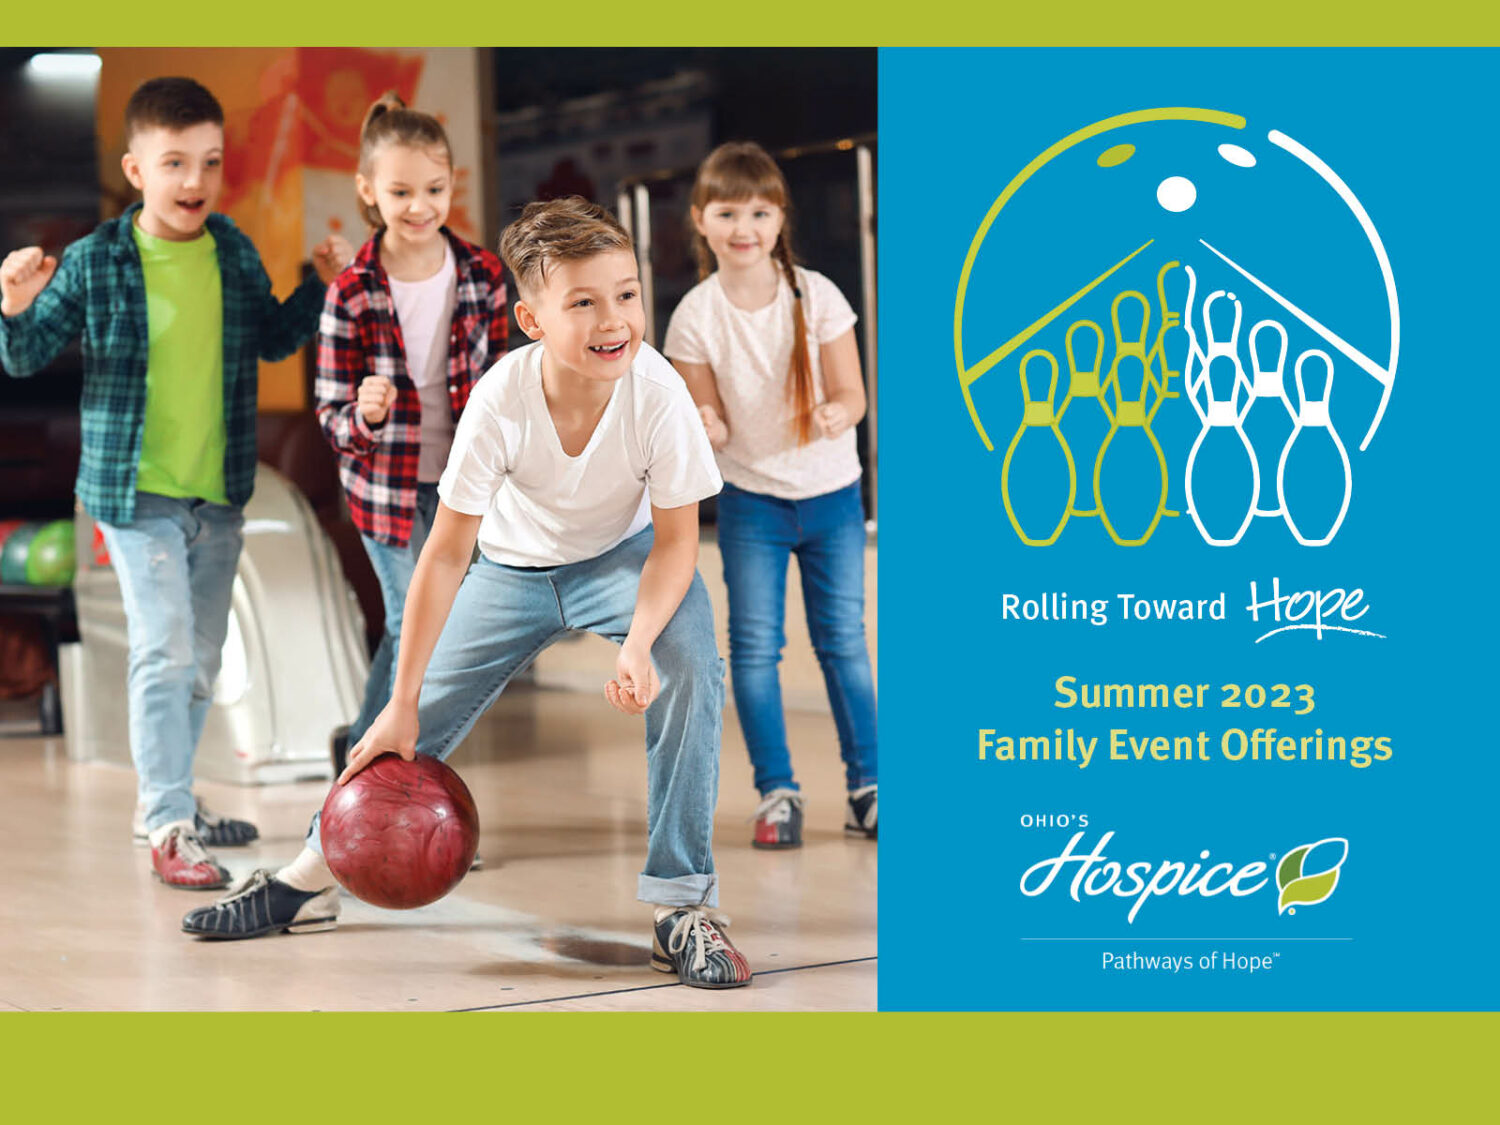 Rolling Toward Hope. Summer 2023 Family Event Offerings. Ohio's Hospice of Dayton